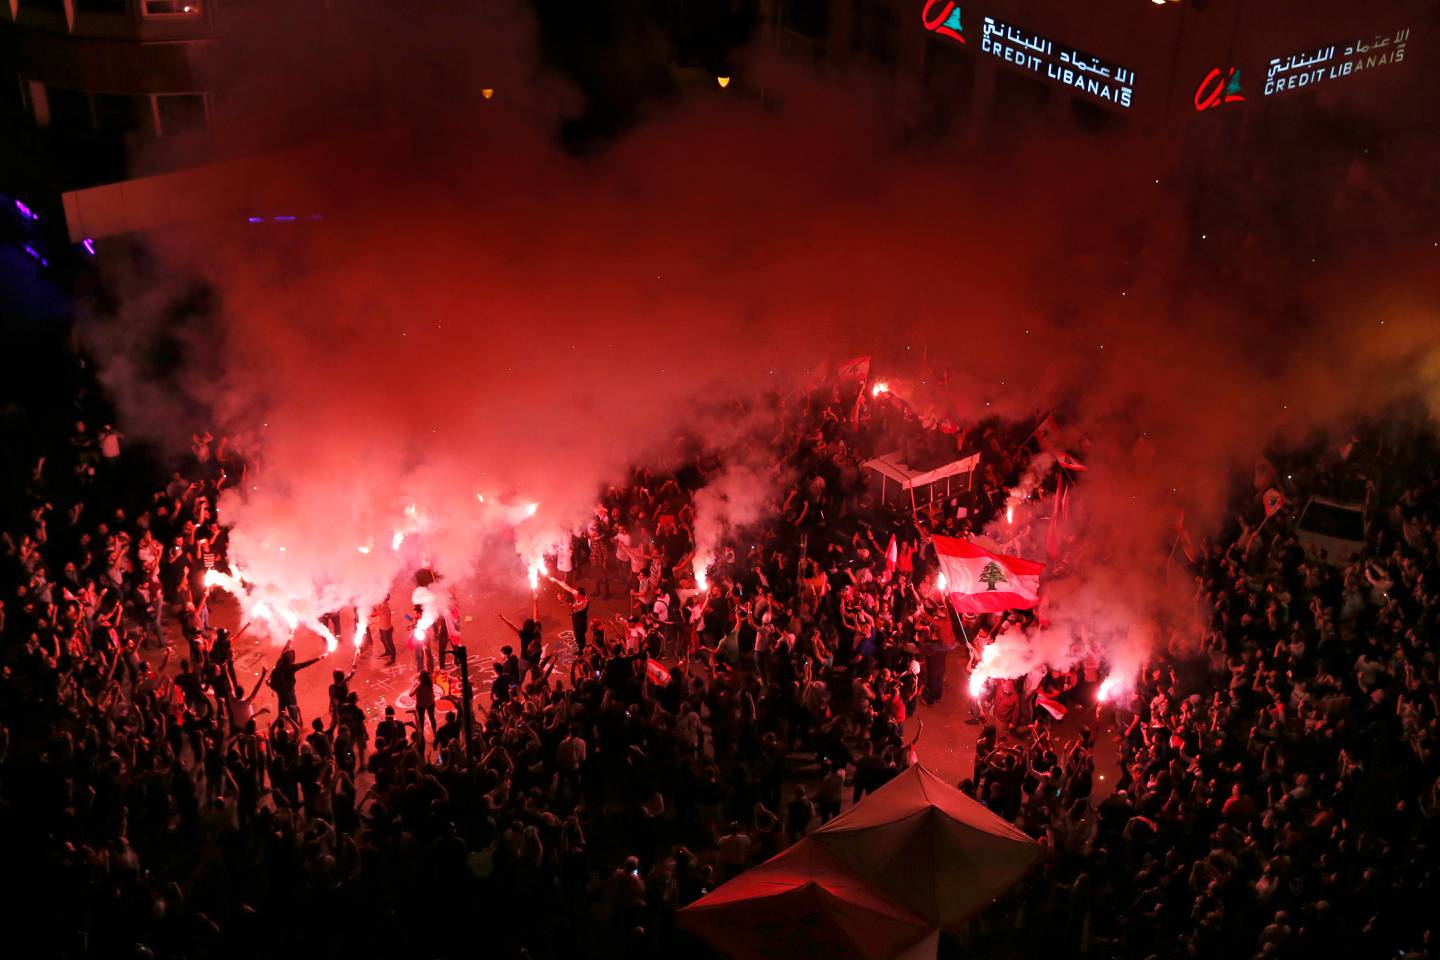 Anti-government protesters light flares and chant slogans against the Lebanese government, in Beirut, Lebanon, Sunday, Nov. 3, 2019. President Michel Aoun and his son-in-law, Foreign Minister Gebran Bassil, have been among the main targets of mass protests that aim to sweep from power Lebanon's entire sectarian and political elite. (AP Photo/Bilal Hussein)